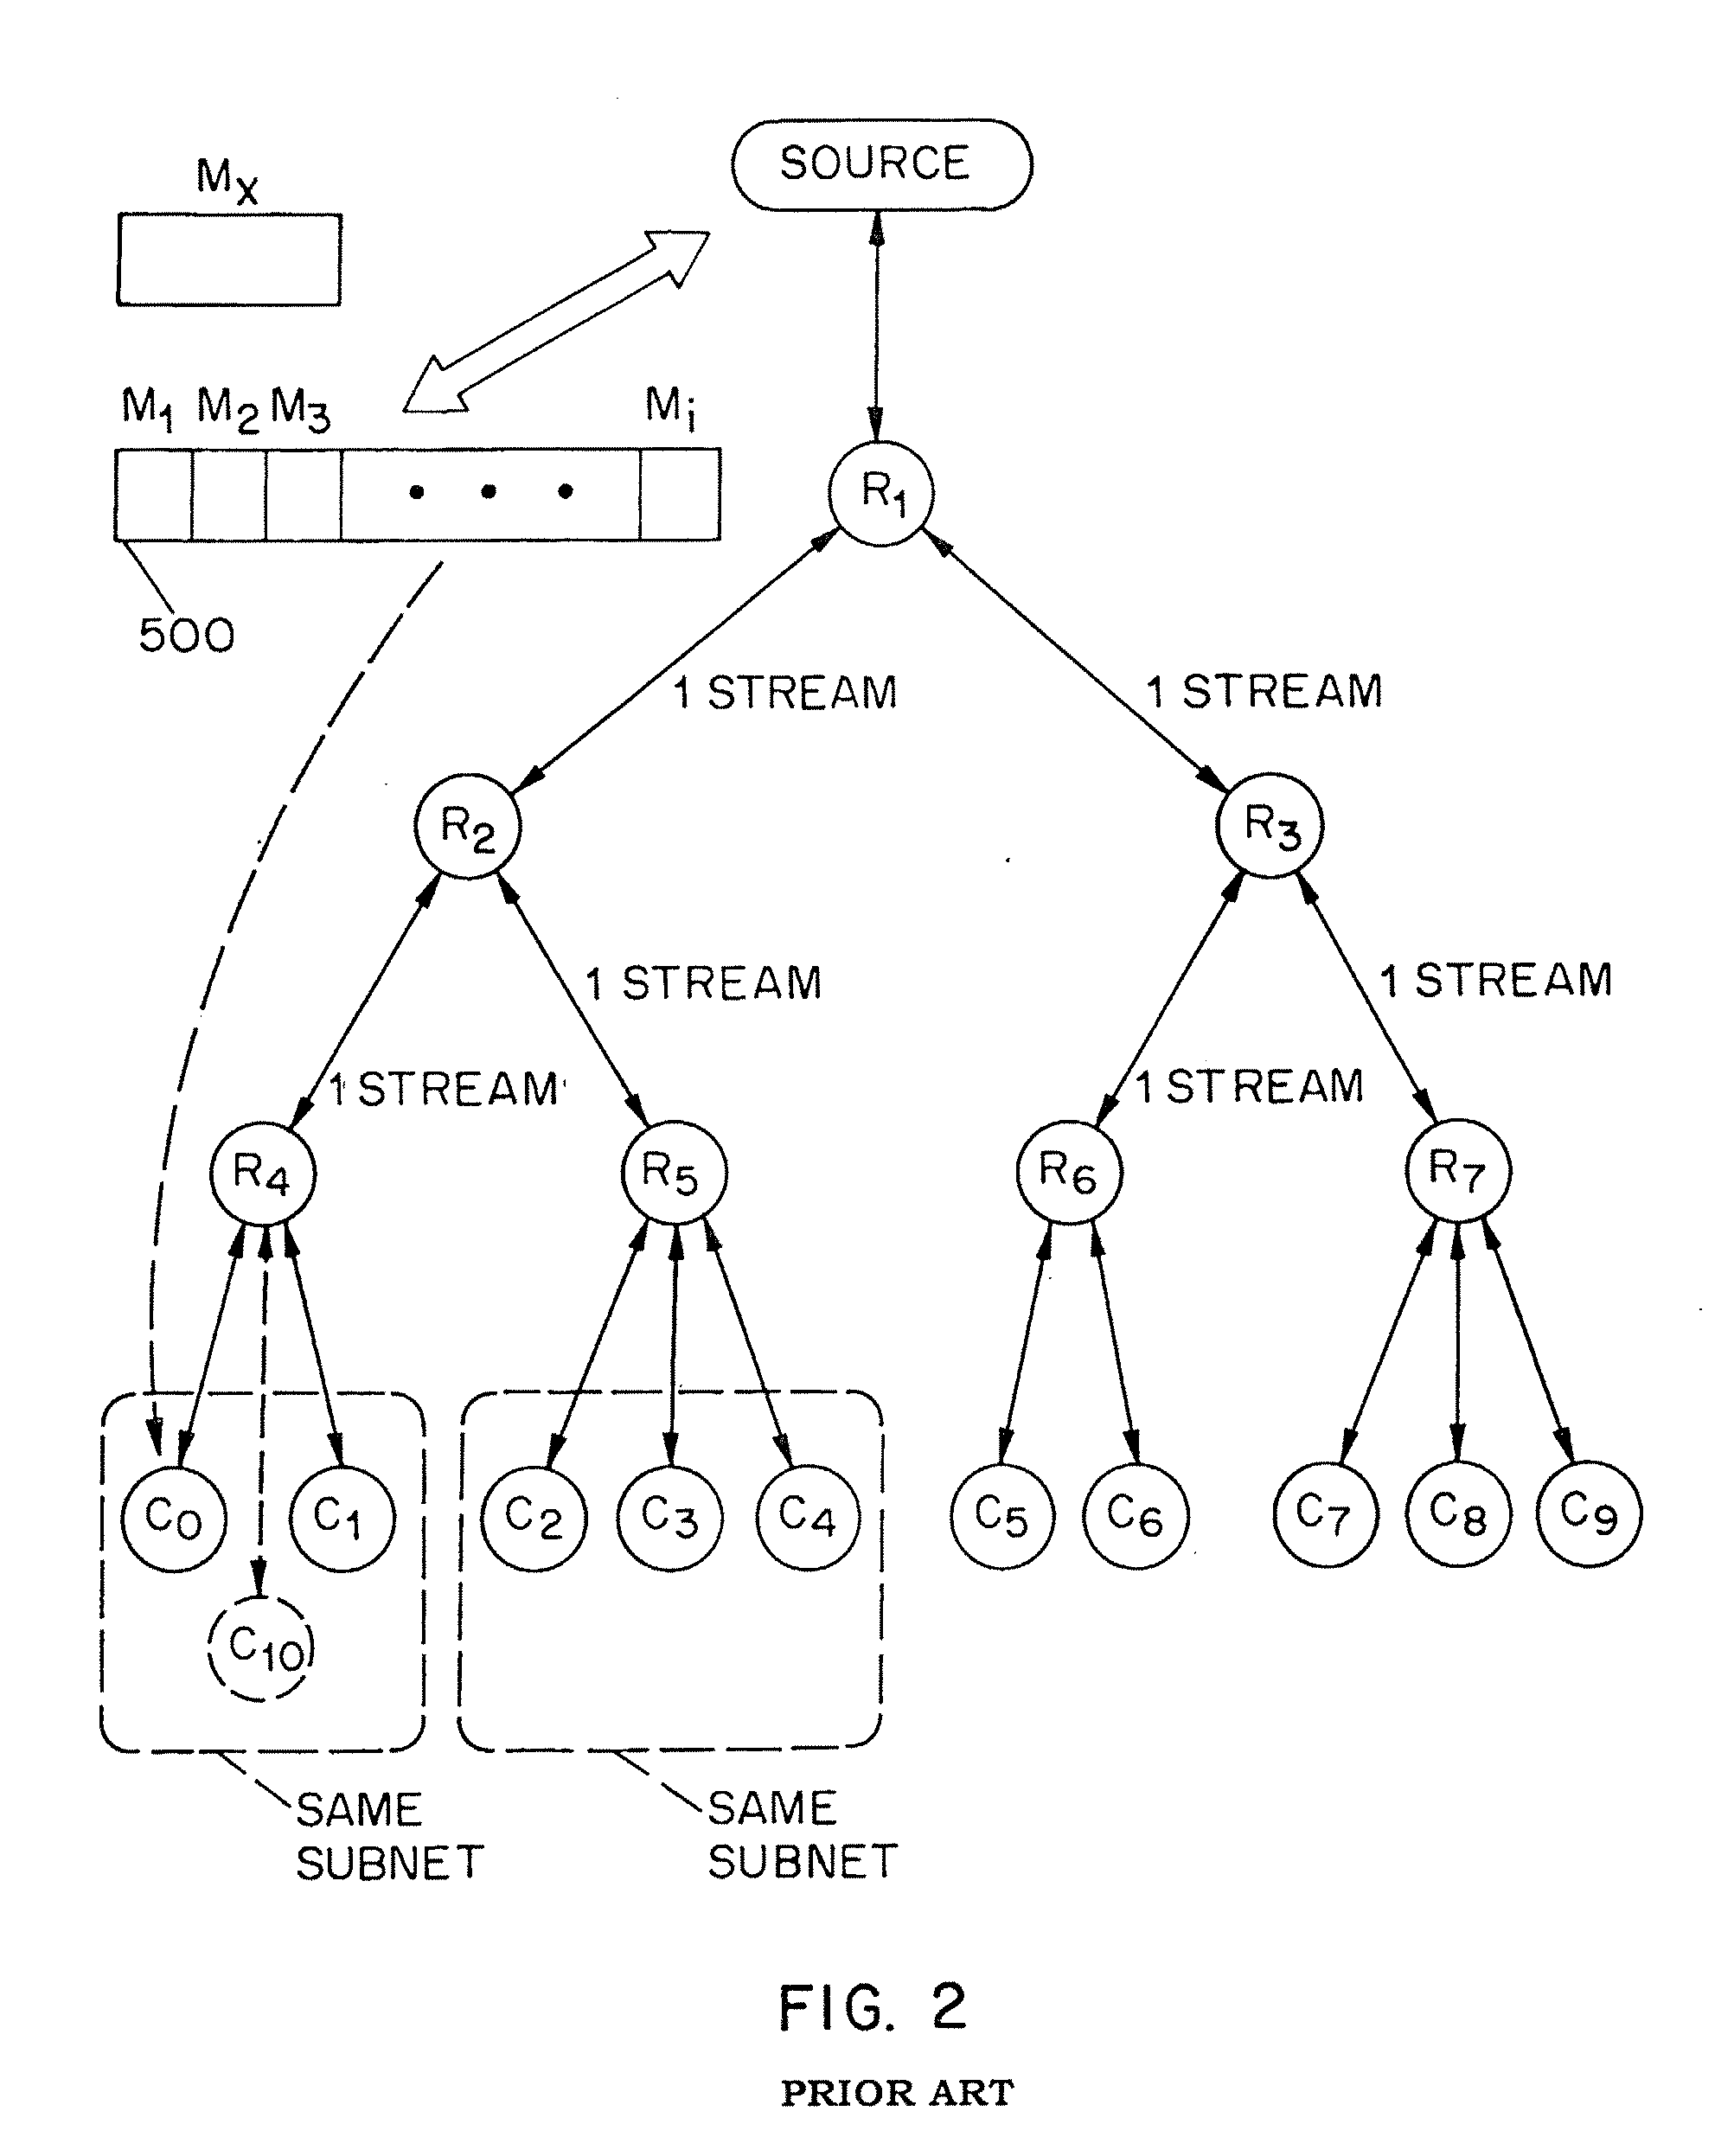 System and method for receiving over a network a broadcast from a broadcast source